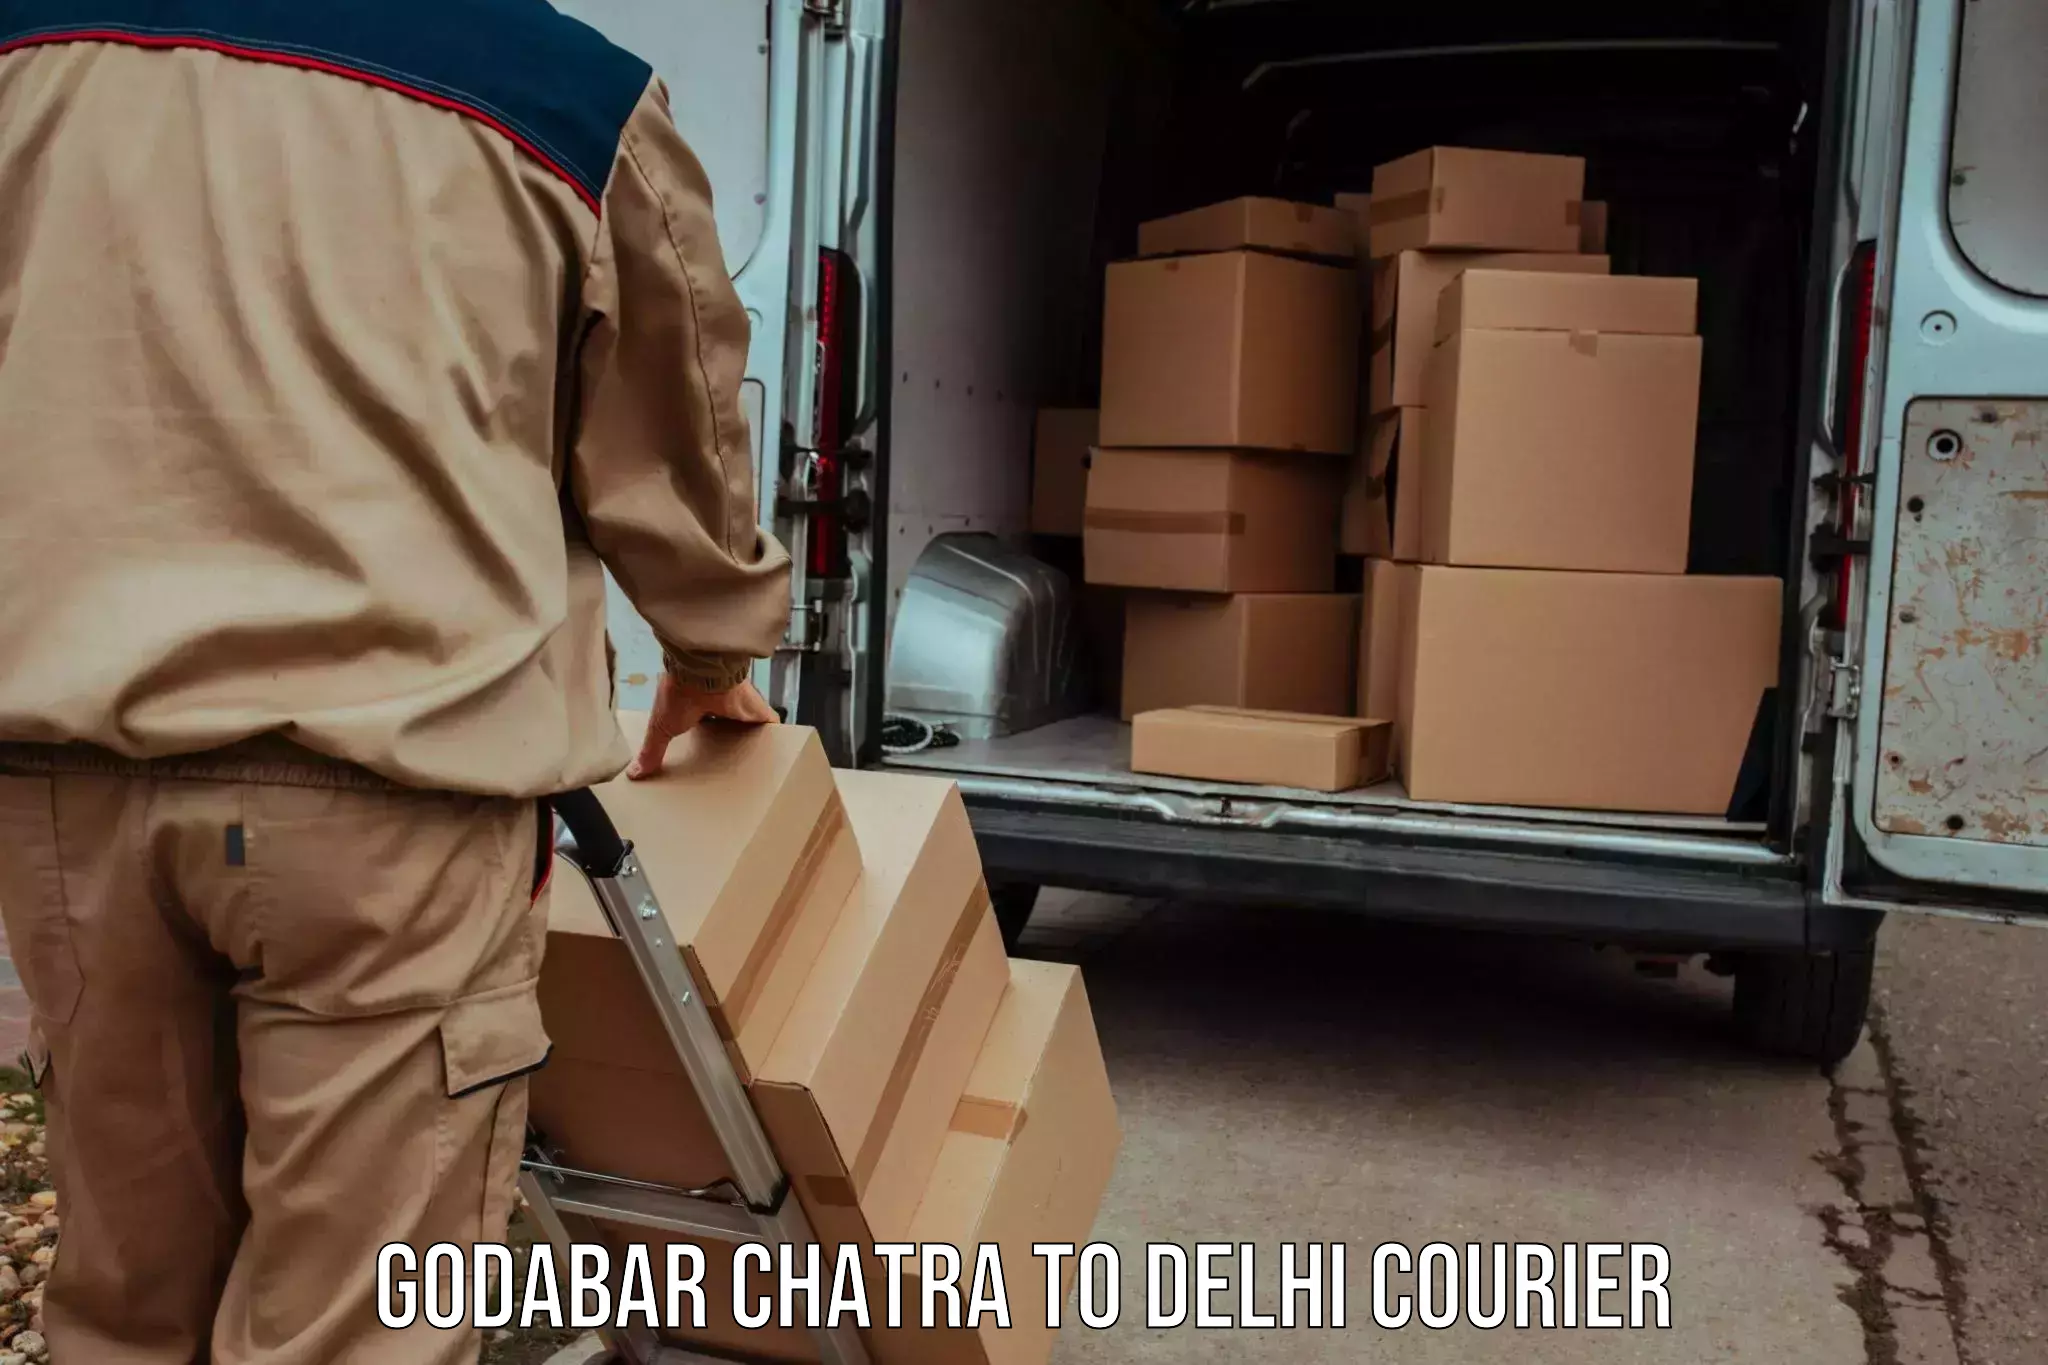 High-speed parcel service Godabar Chatra to Lodhi Road